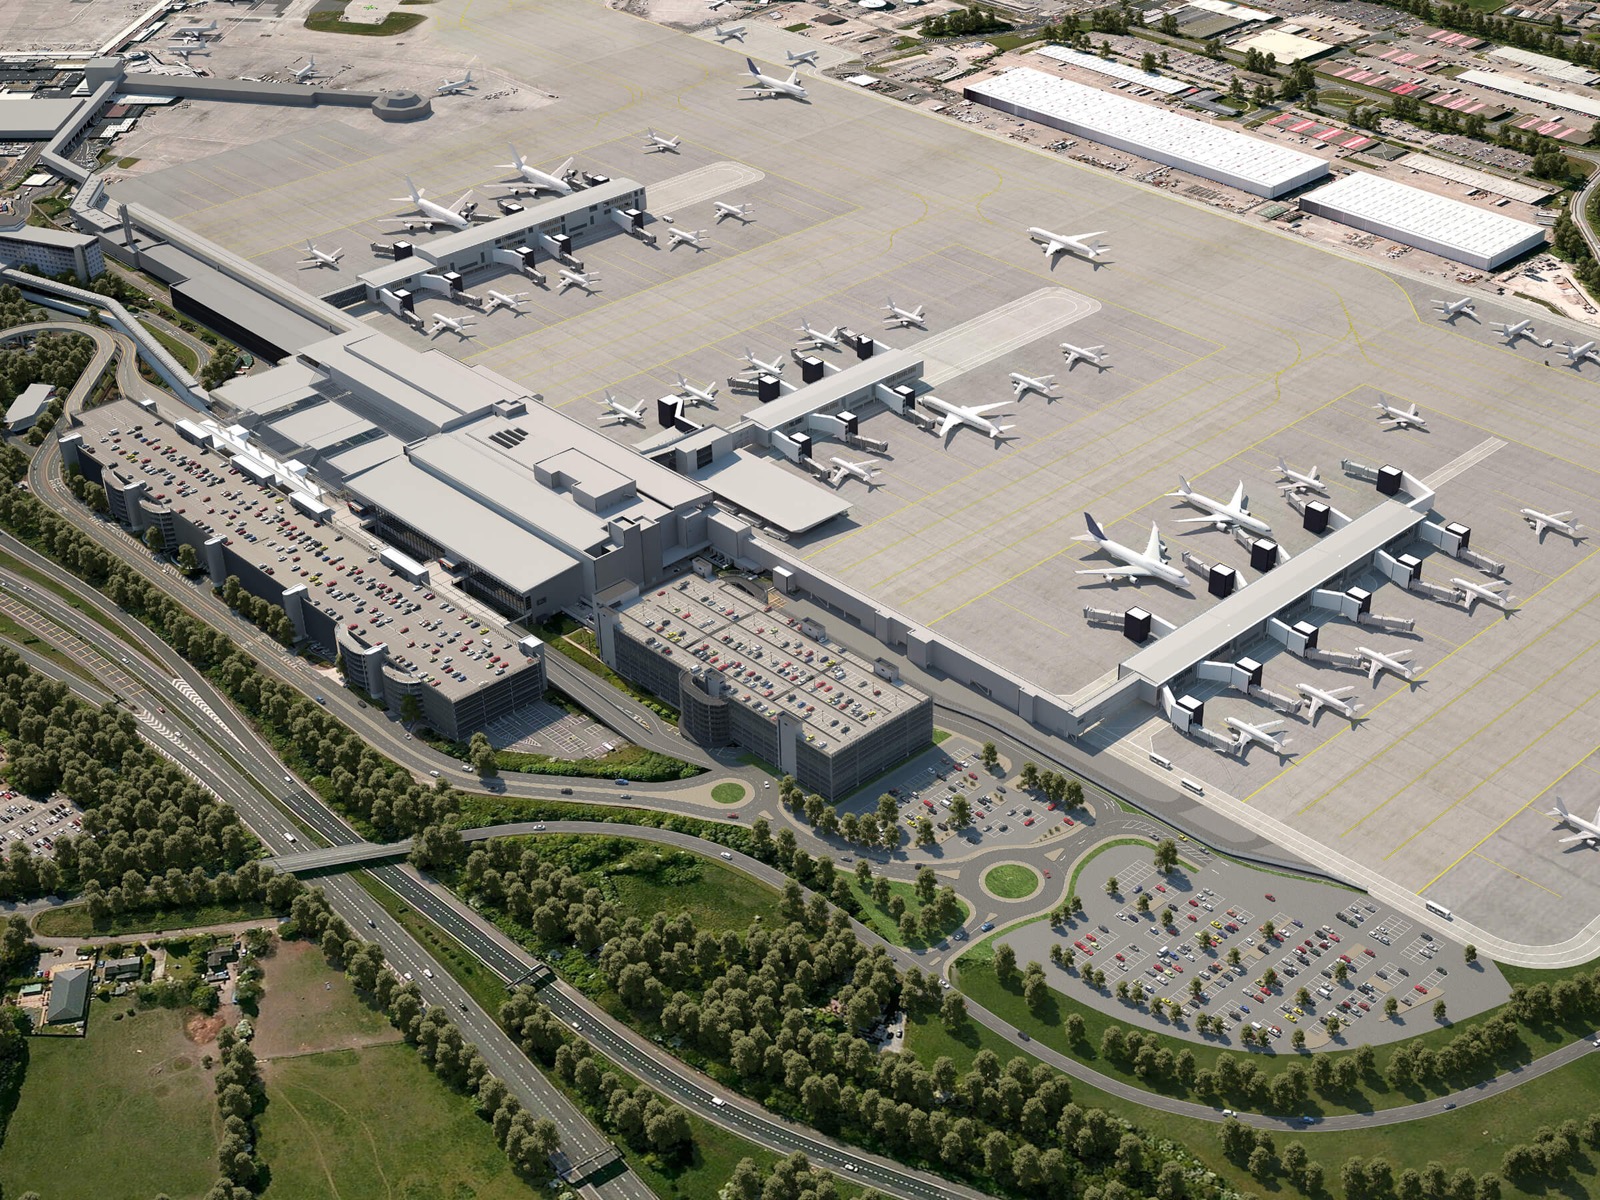 Here Are 20 General Knowledge Questions — How Many Can You Answer Correctly? Manchester Airport